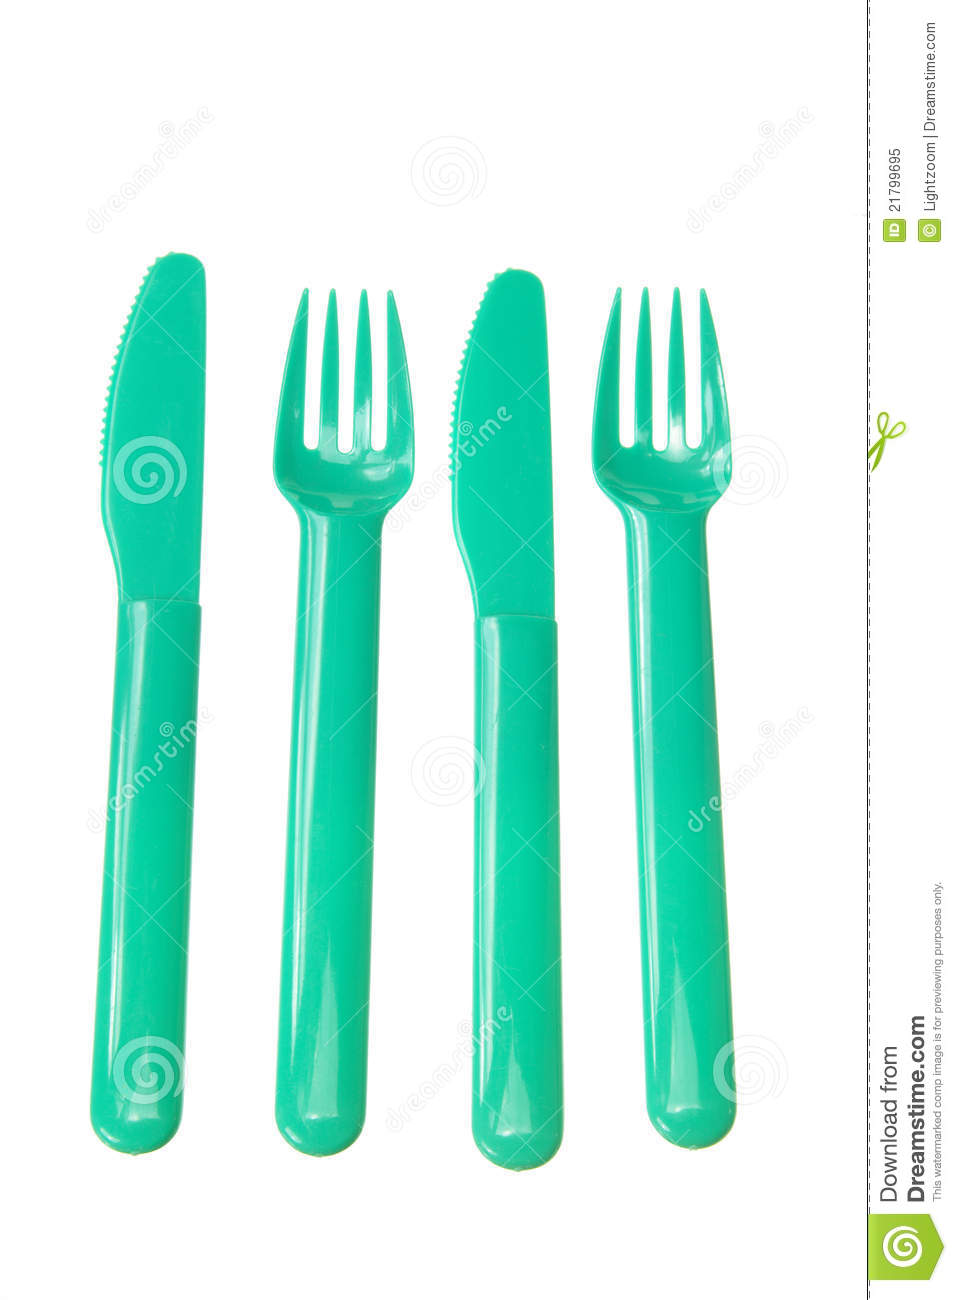 Plastic Fork And Knife Royalty Free Stock Photo   Image  21799695